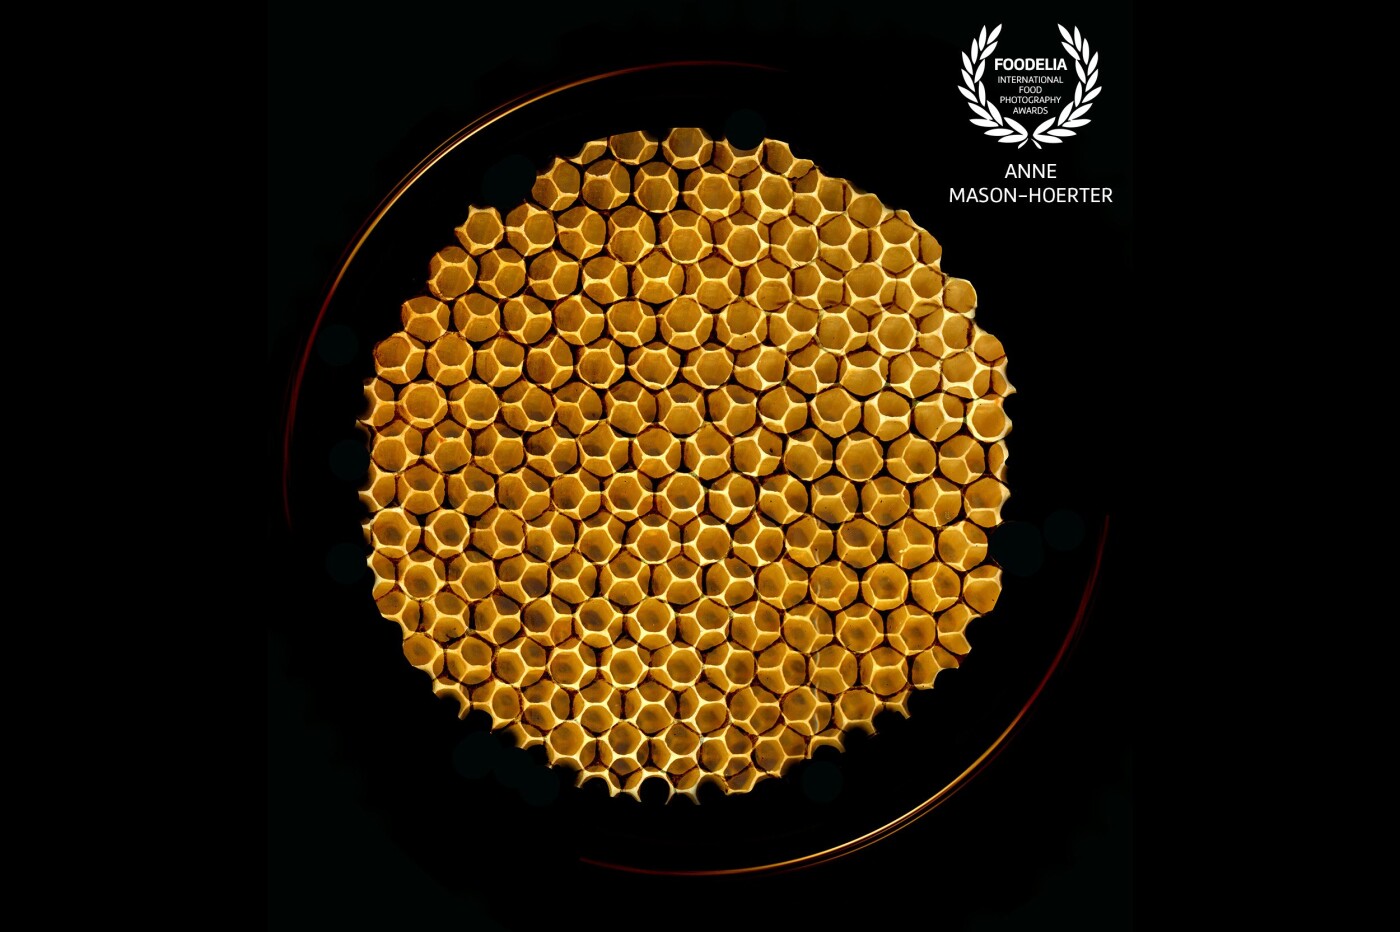 Multiple scanned data combined with camera data of a Honeycomb. I wanted to approach this subject matter from a unique perspective and produce an image that would emphasise the incredible structure. 